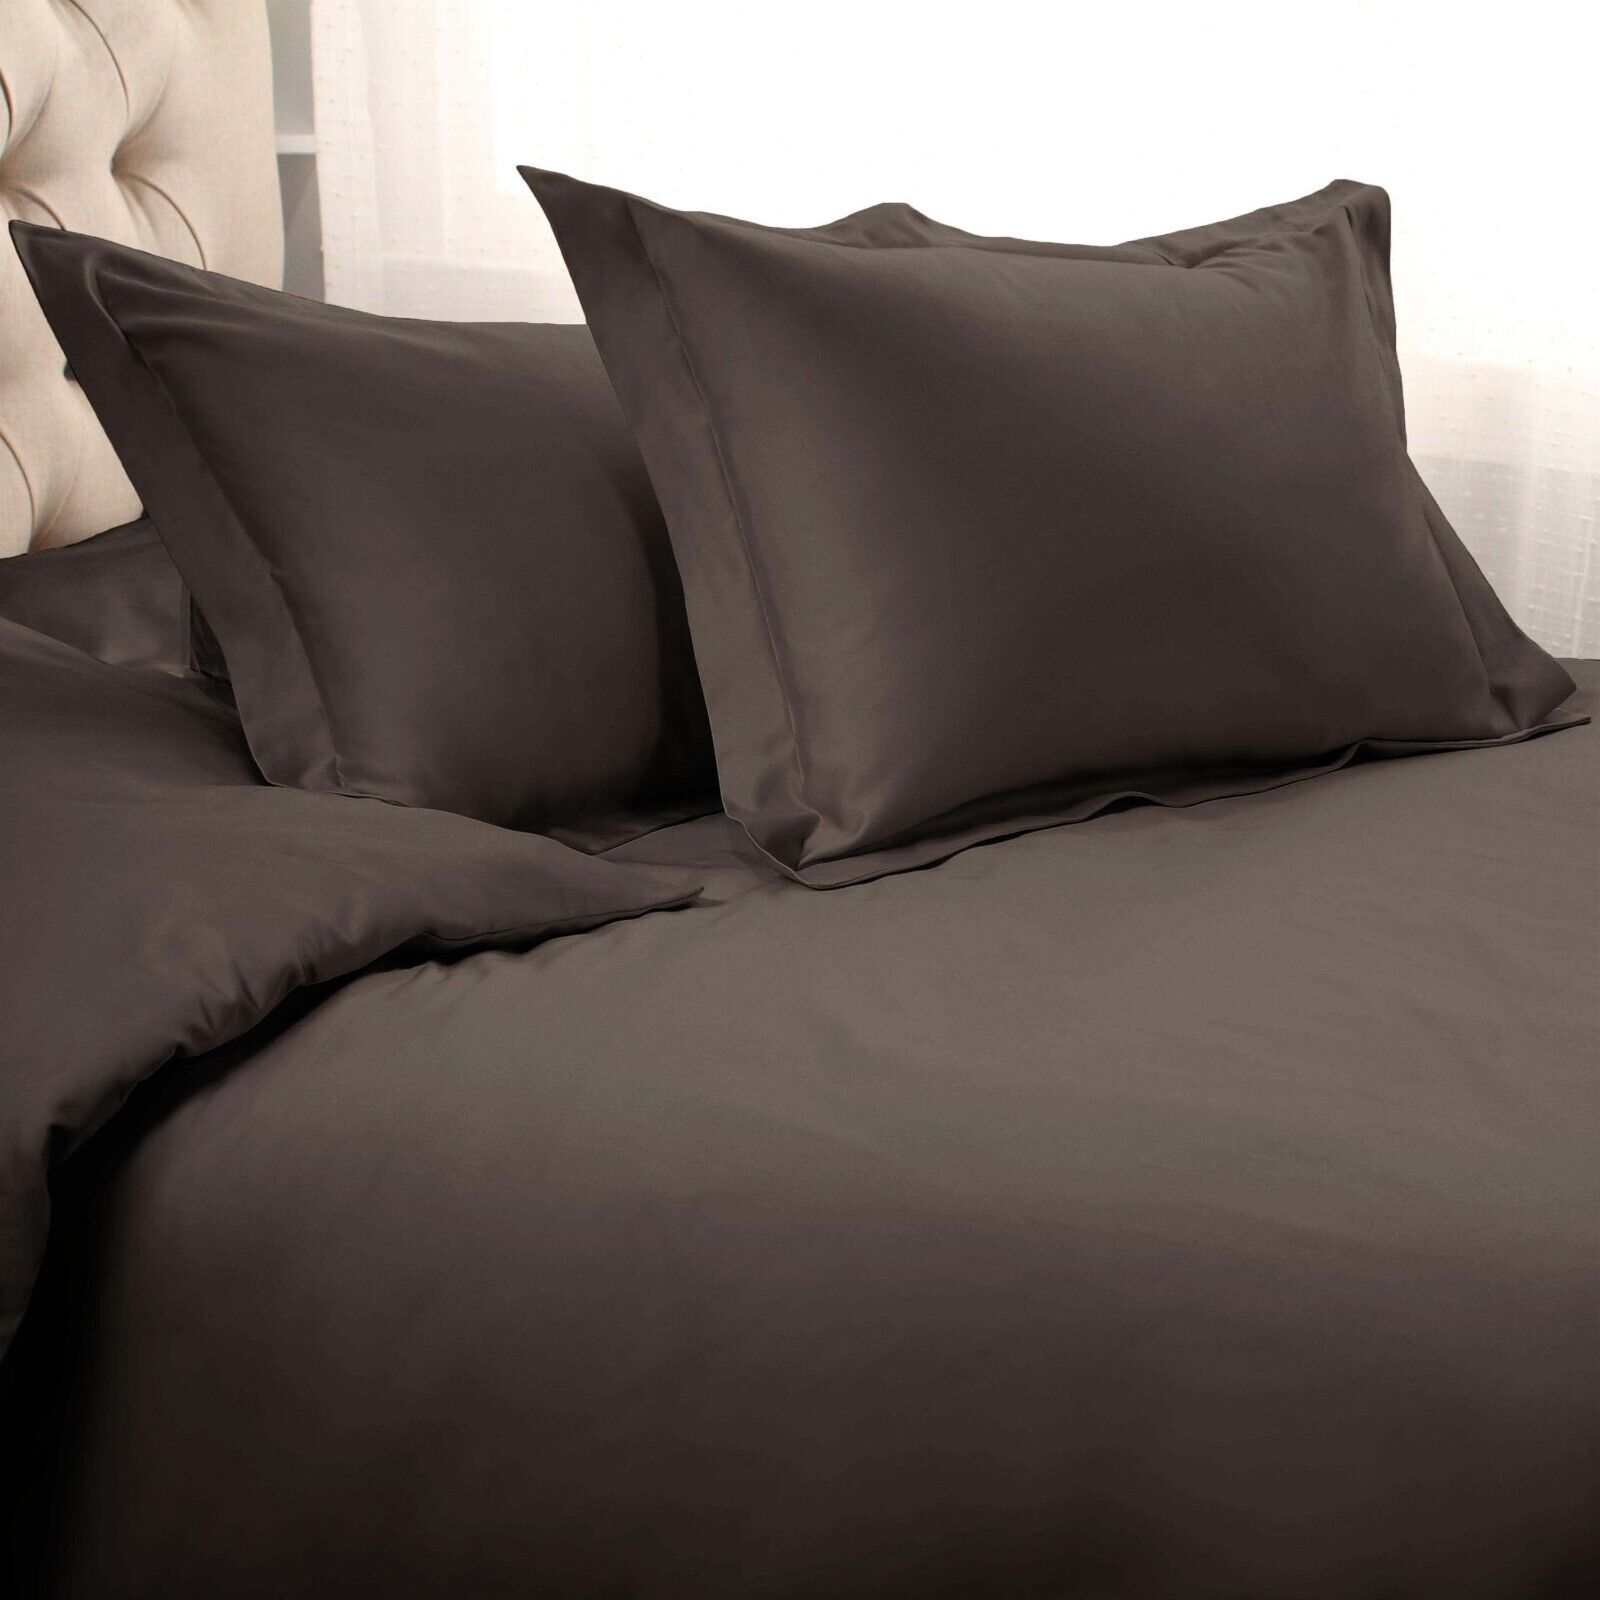 Superior Egyptian Cotton Solid All-Season Duvet Cover Set with Button Closure - Charcoal